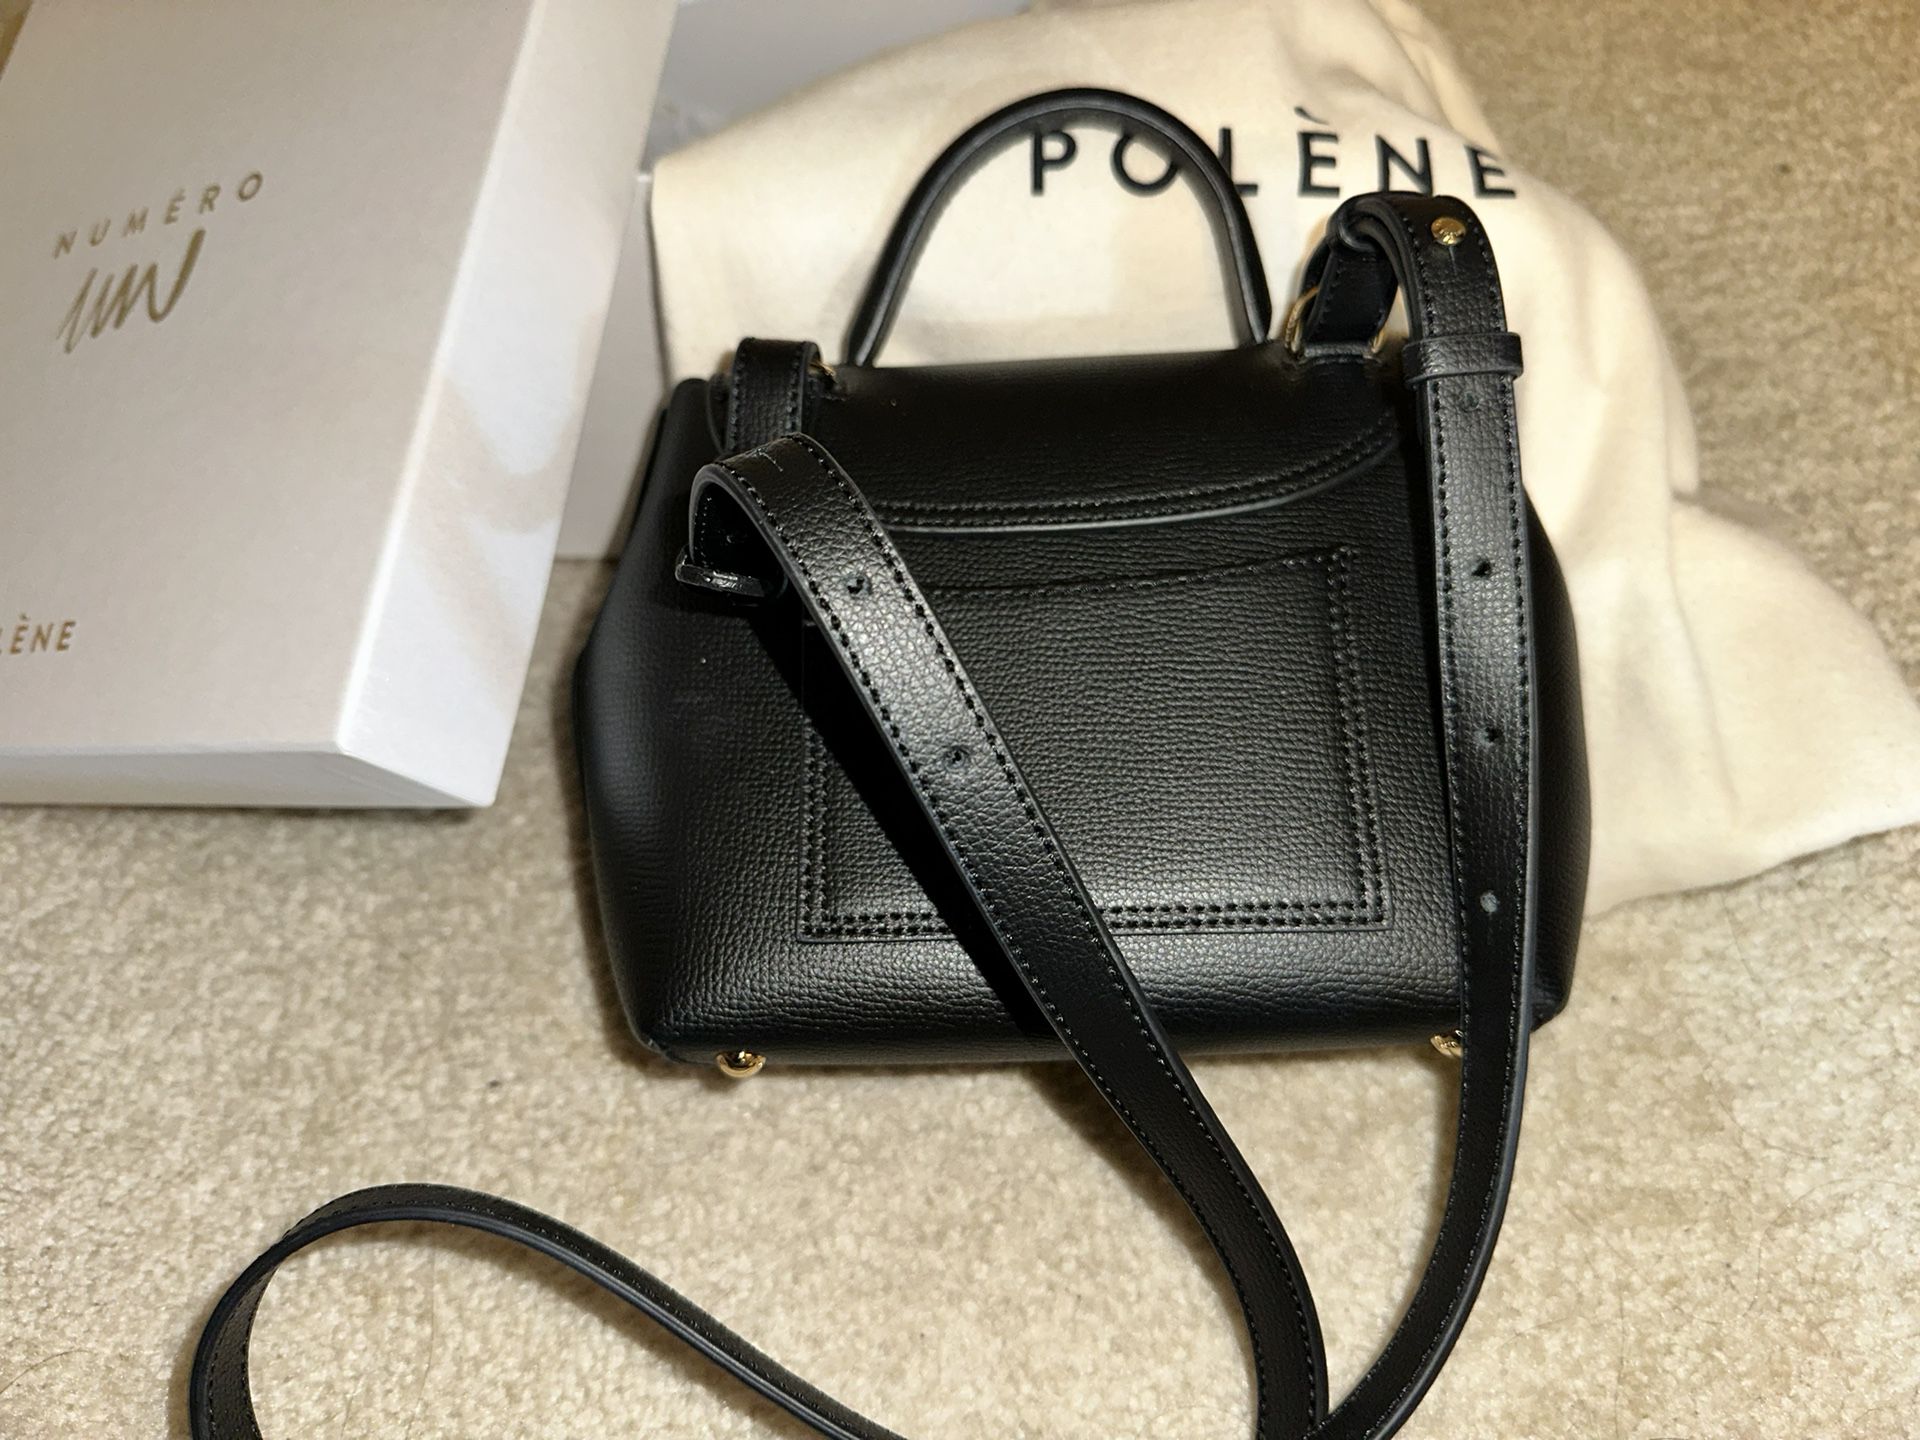 Polene Number One Mini for Sale in Renton, WA - OfferUp